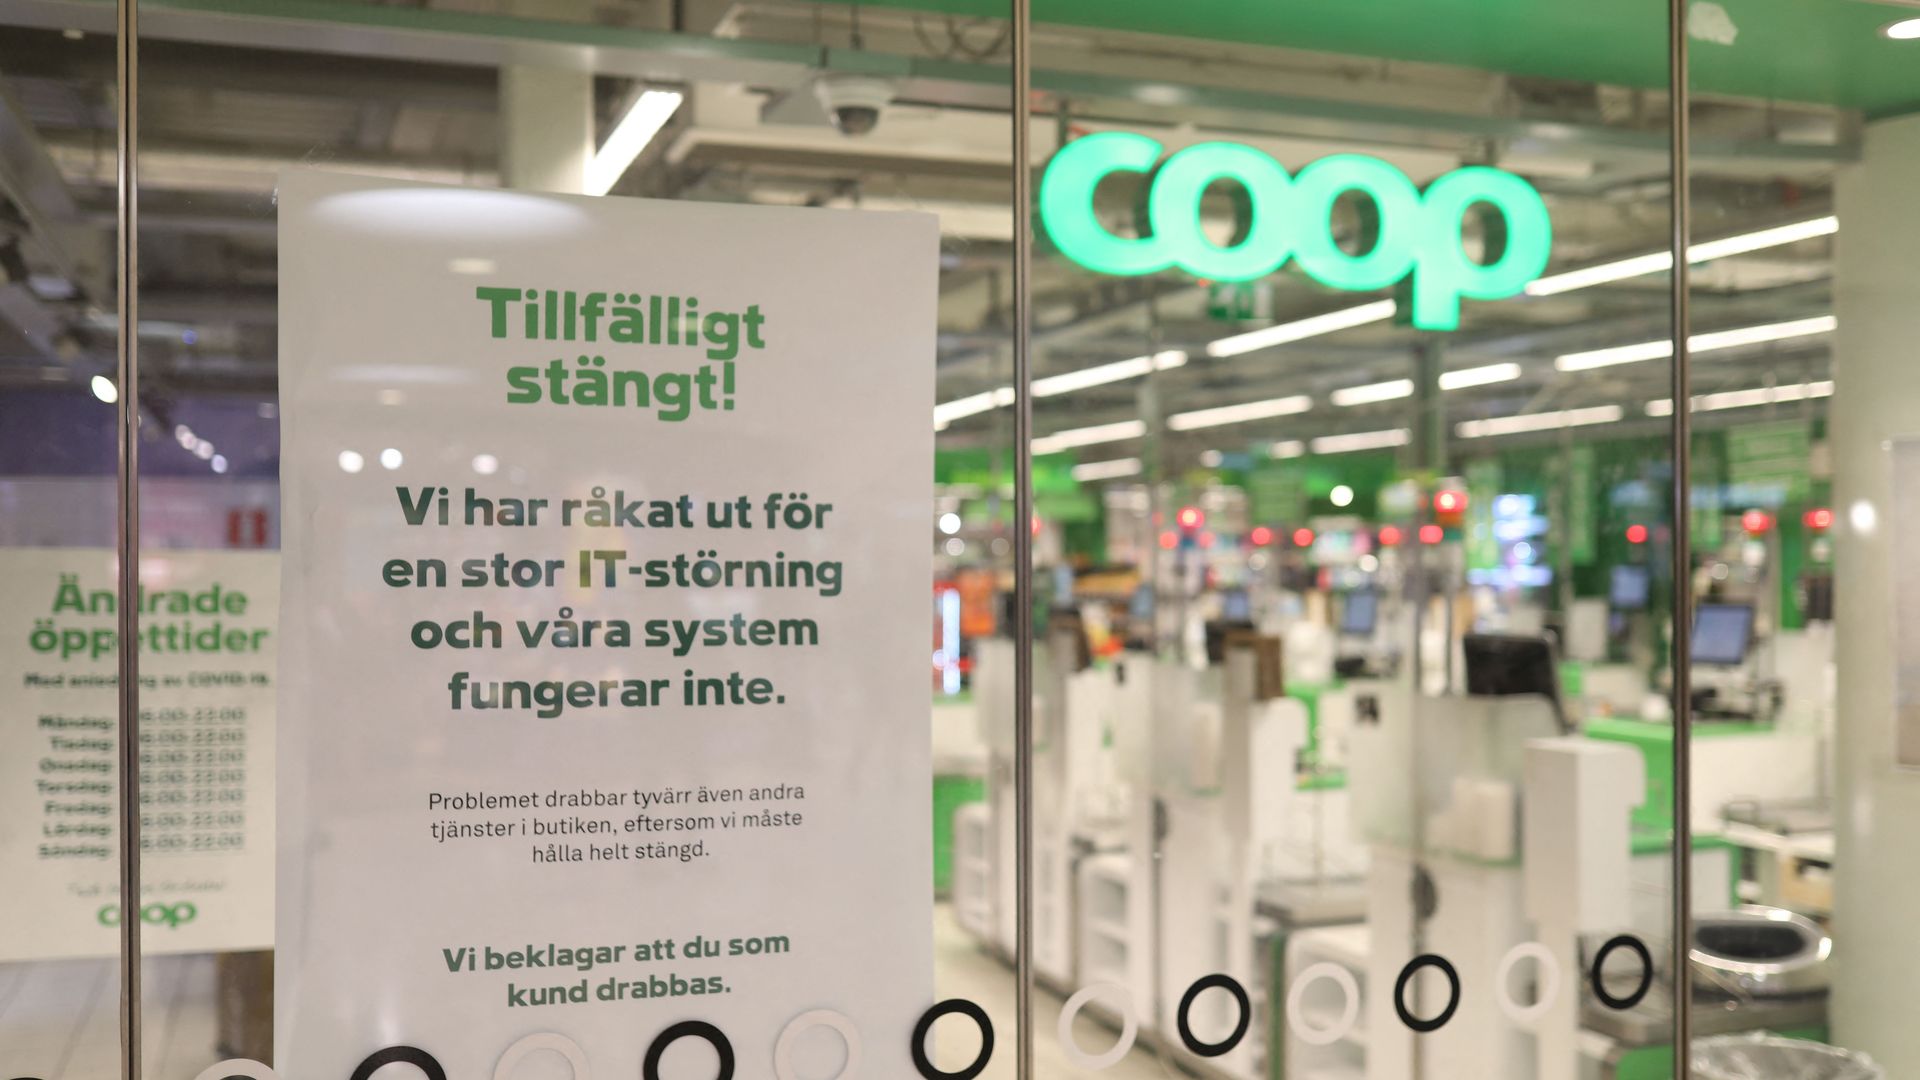 Swedish supermarket Coop says its closed due to ransomware attack